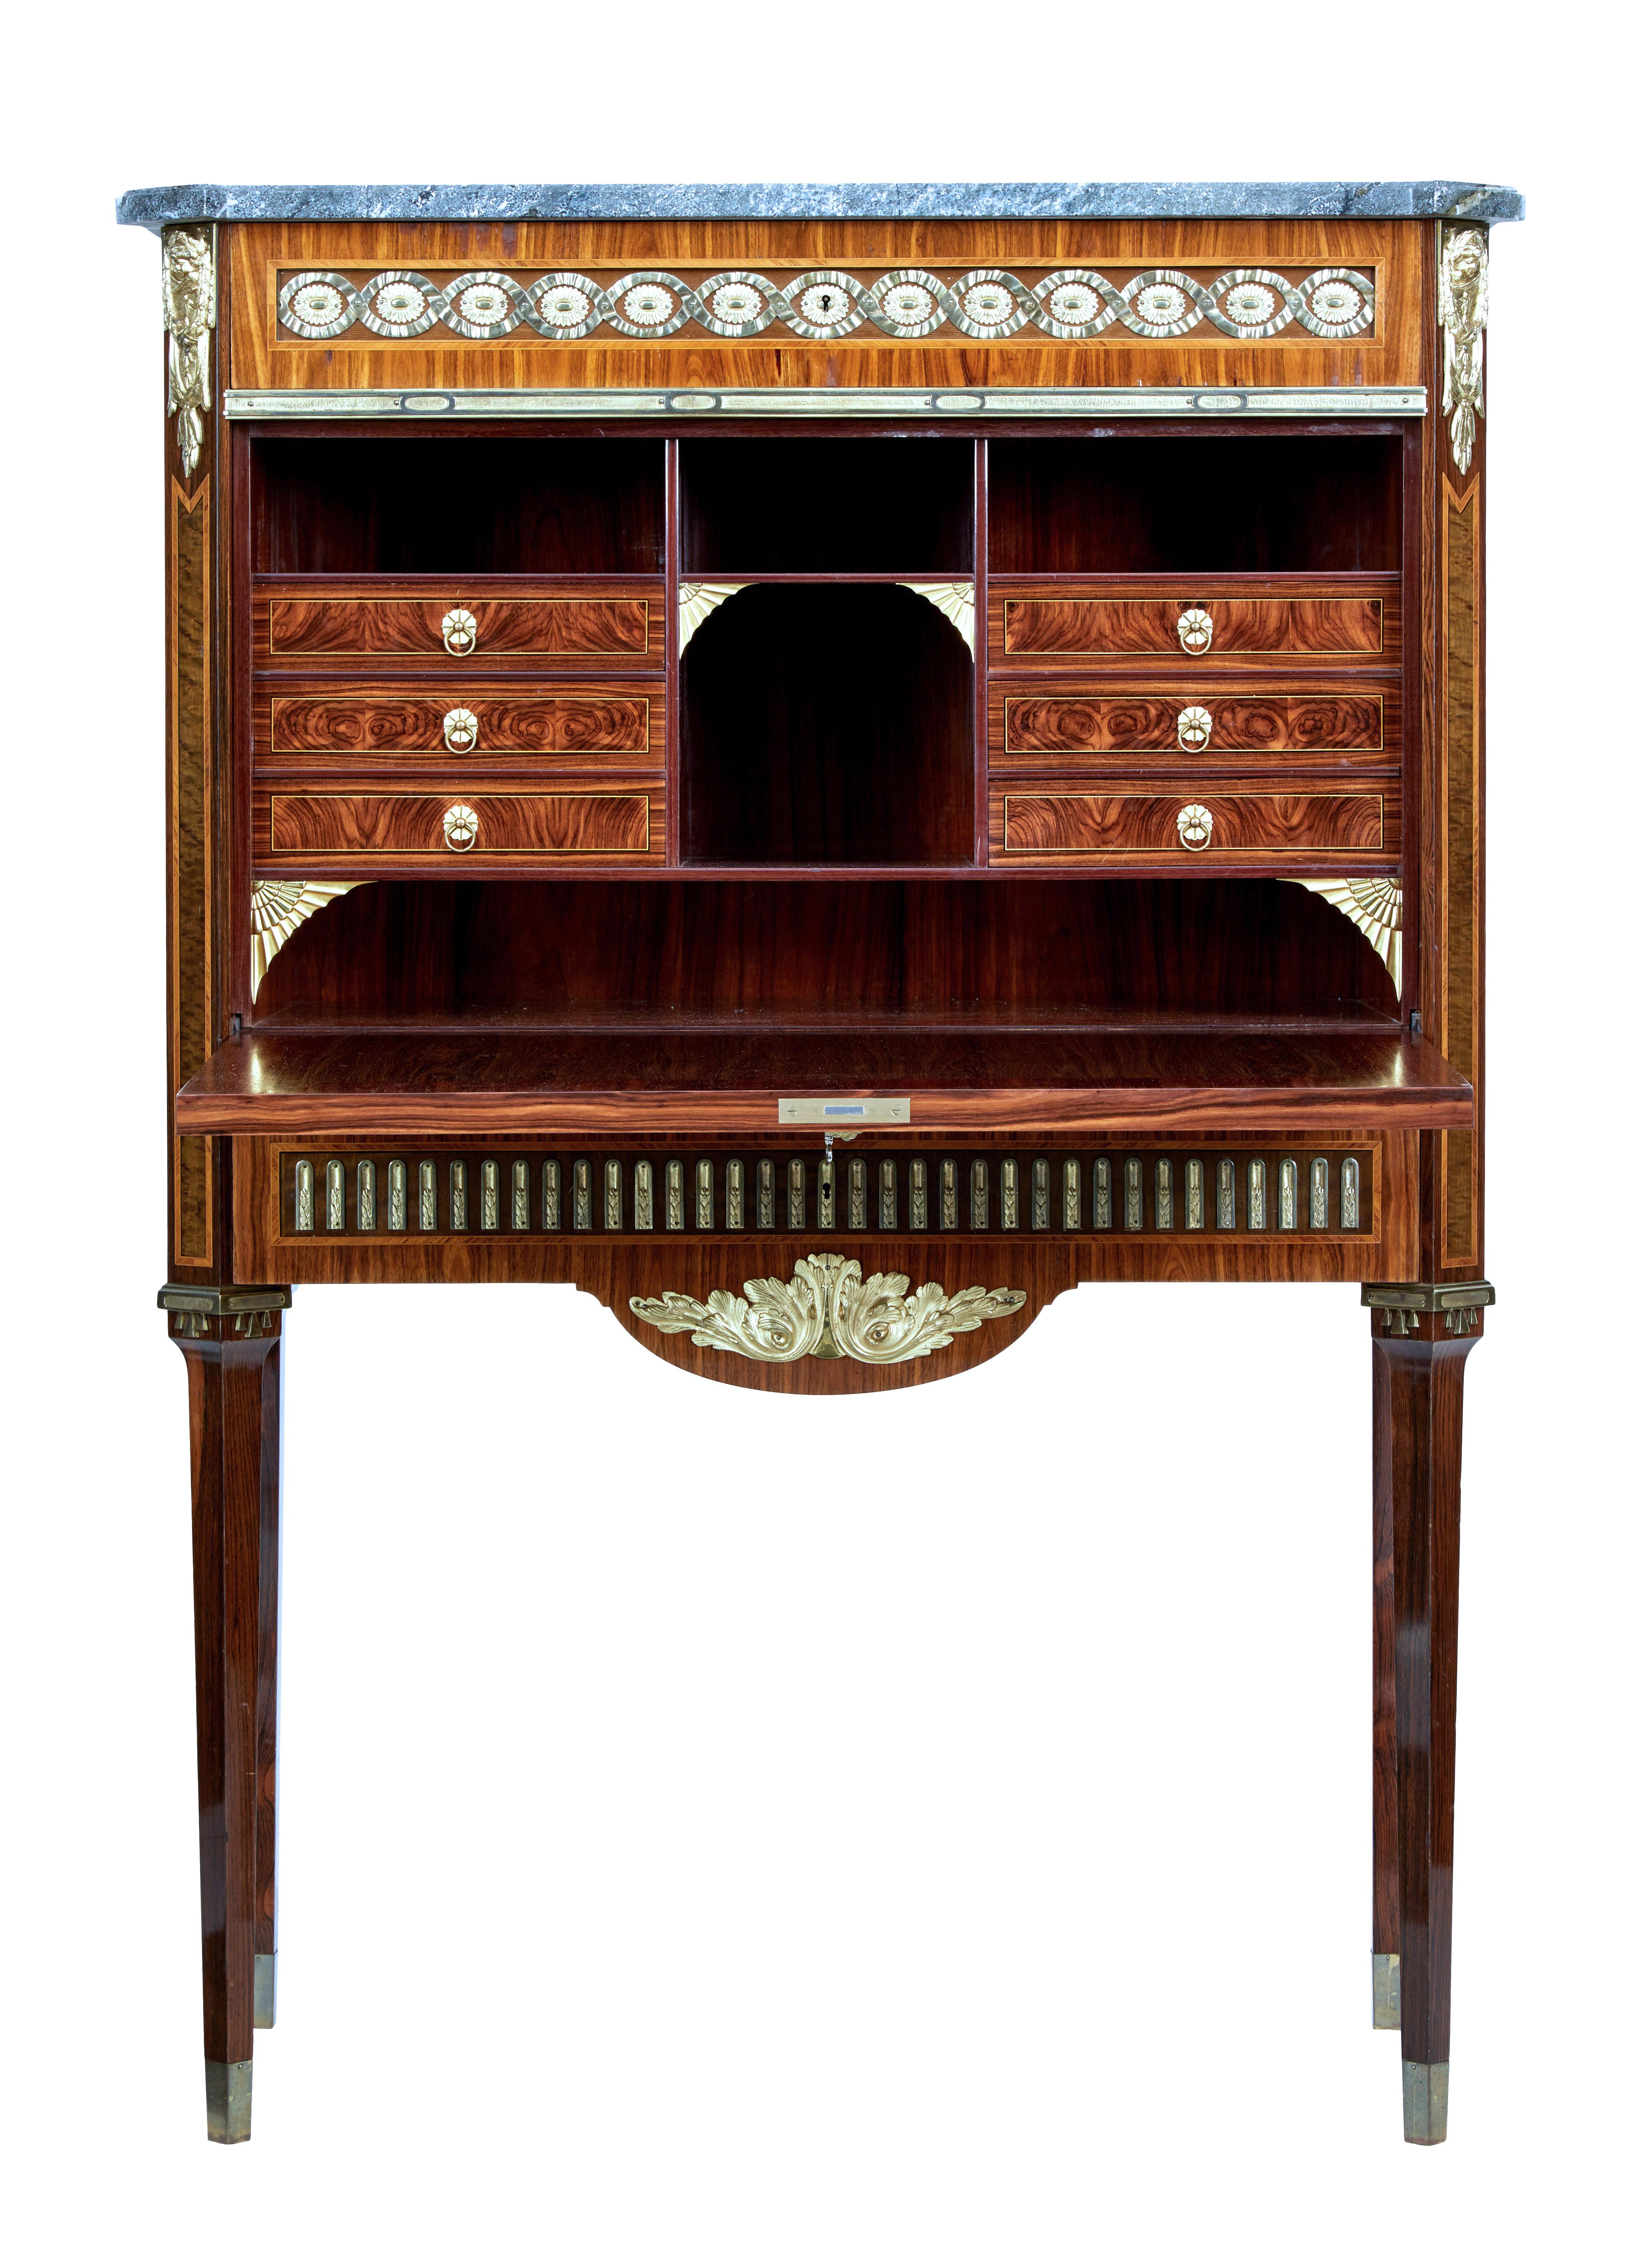 Empire Revival 1930s Kingwood Inlaid Swedish Marble Top Secrétaire